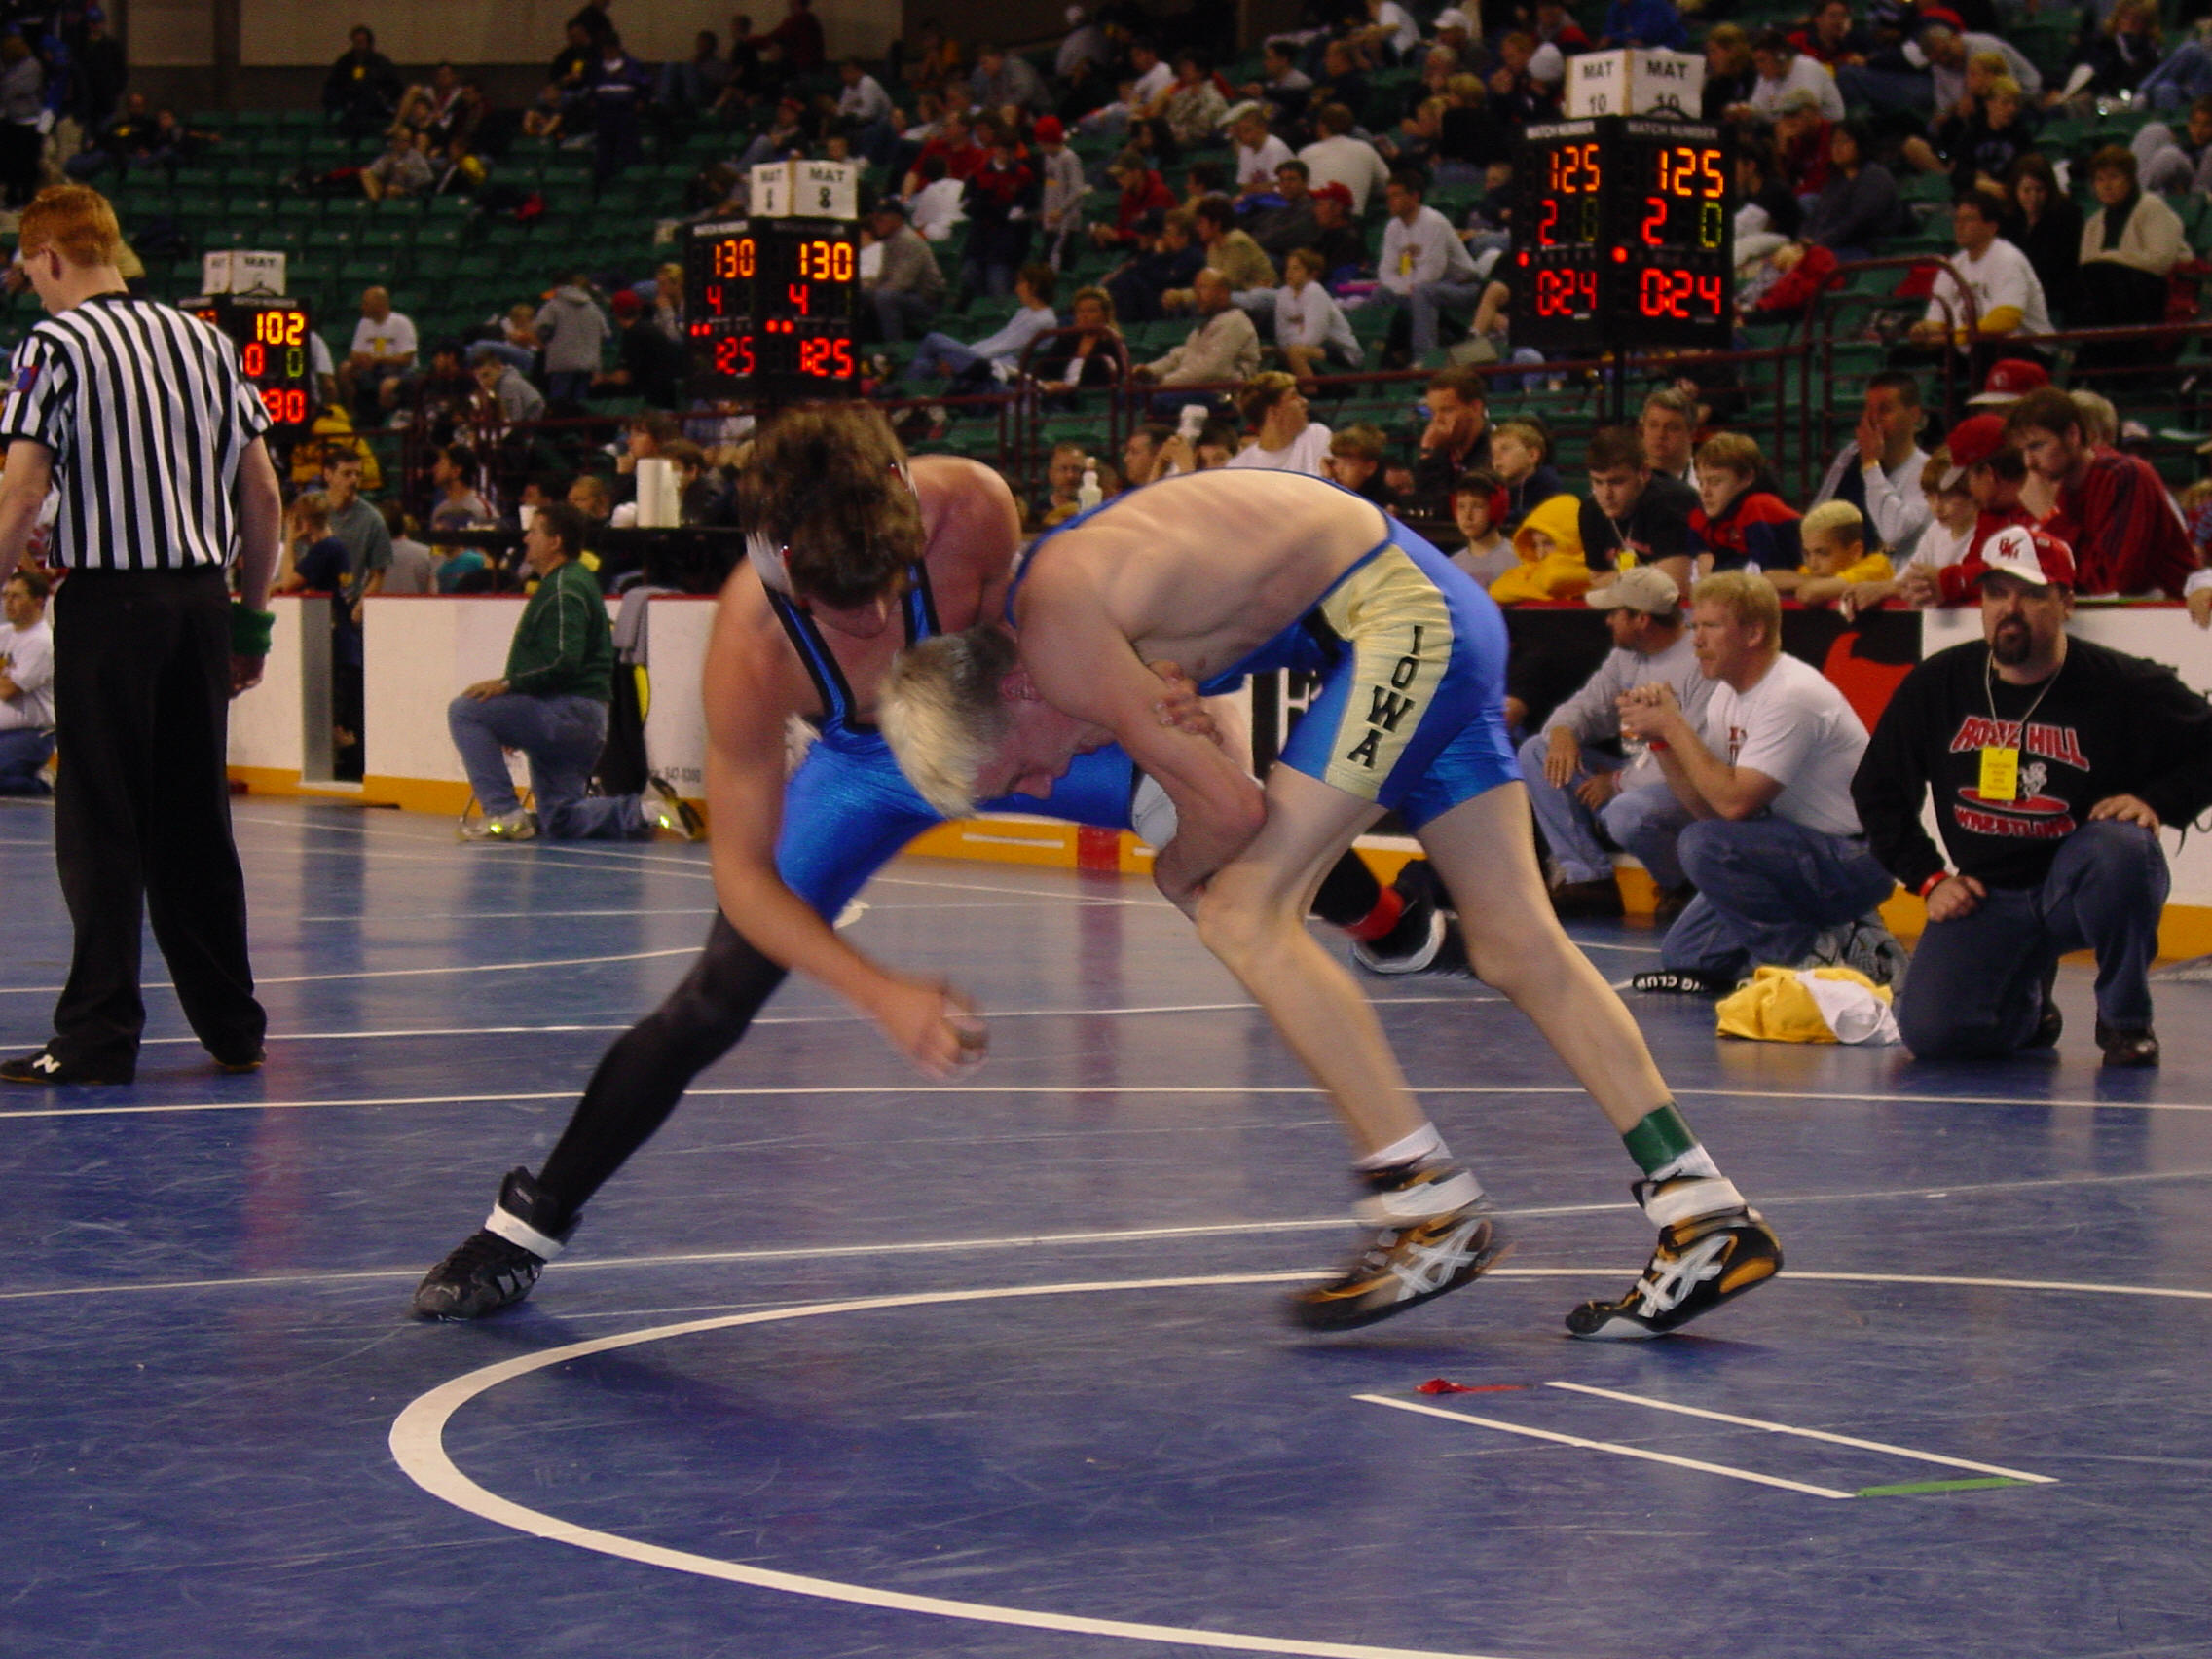 USA Wrestling National Folkstyle photo gallery